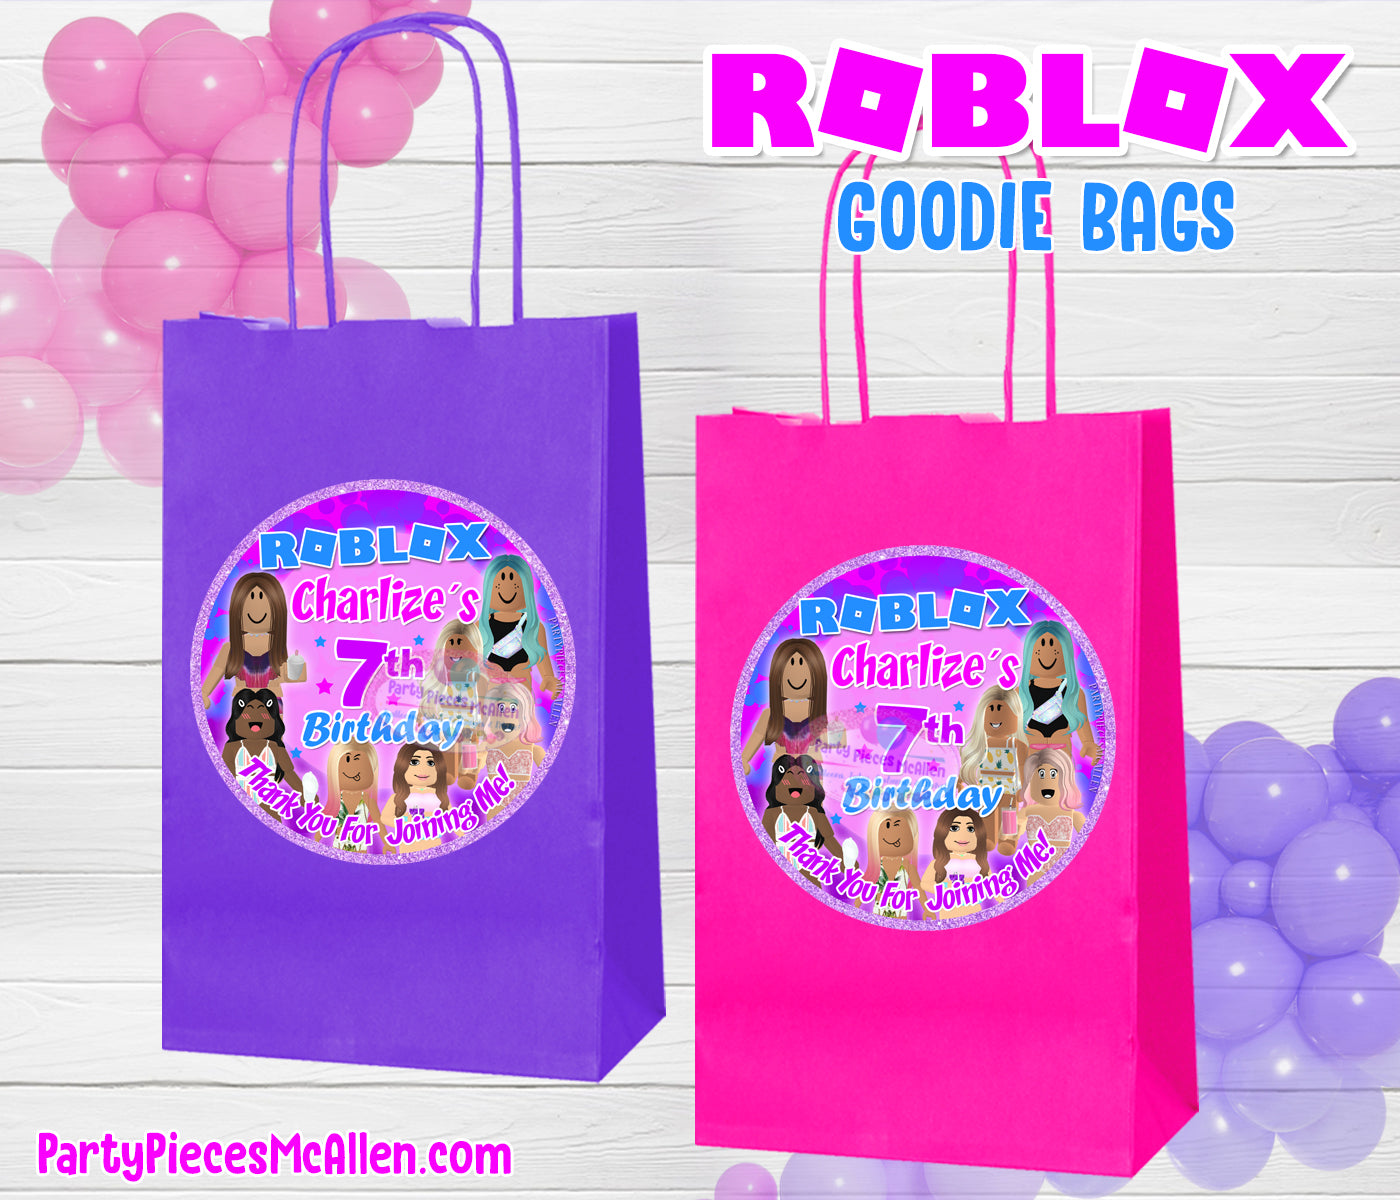 Roblox Girl Pool Party Goodie Bags – Party Pieces McAllen